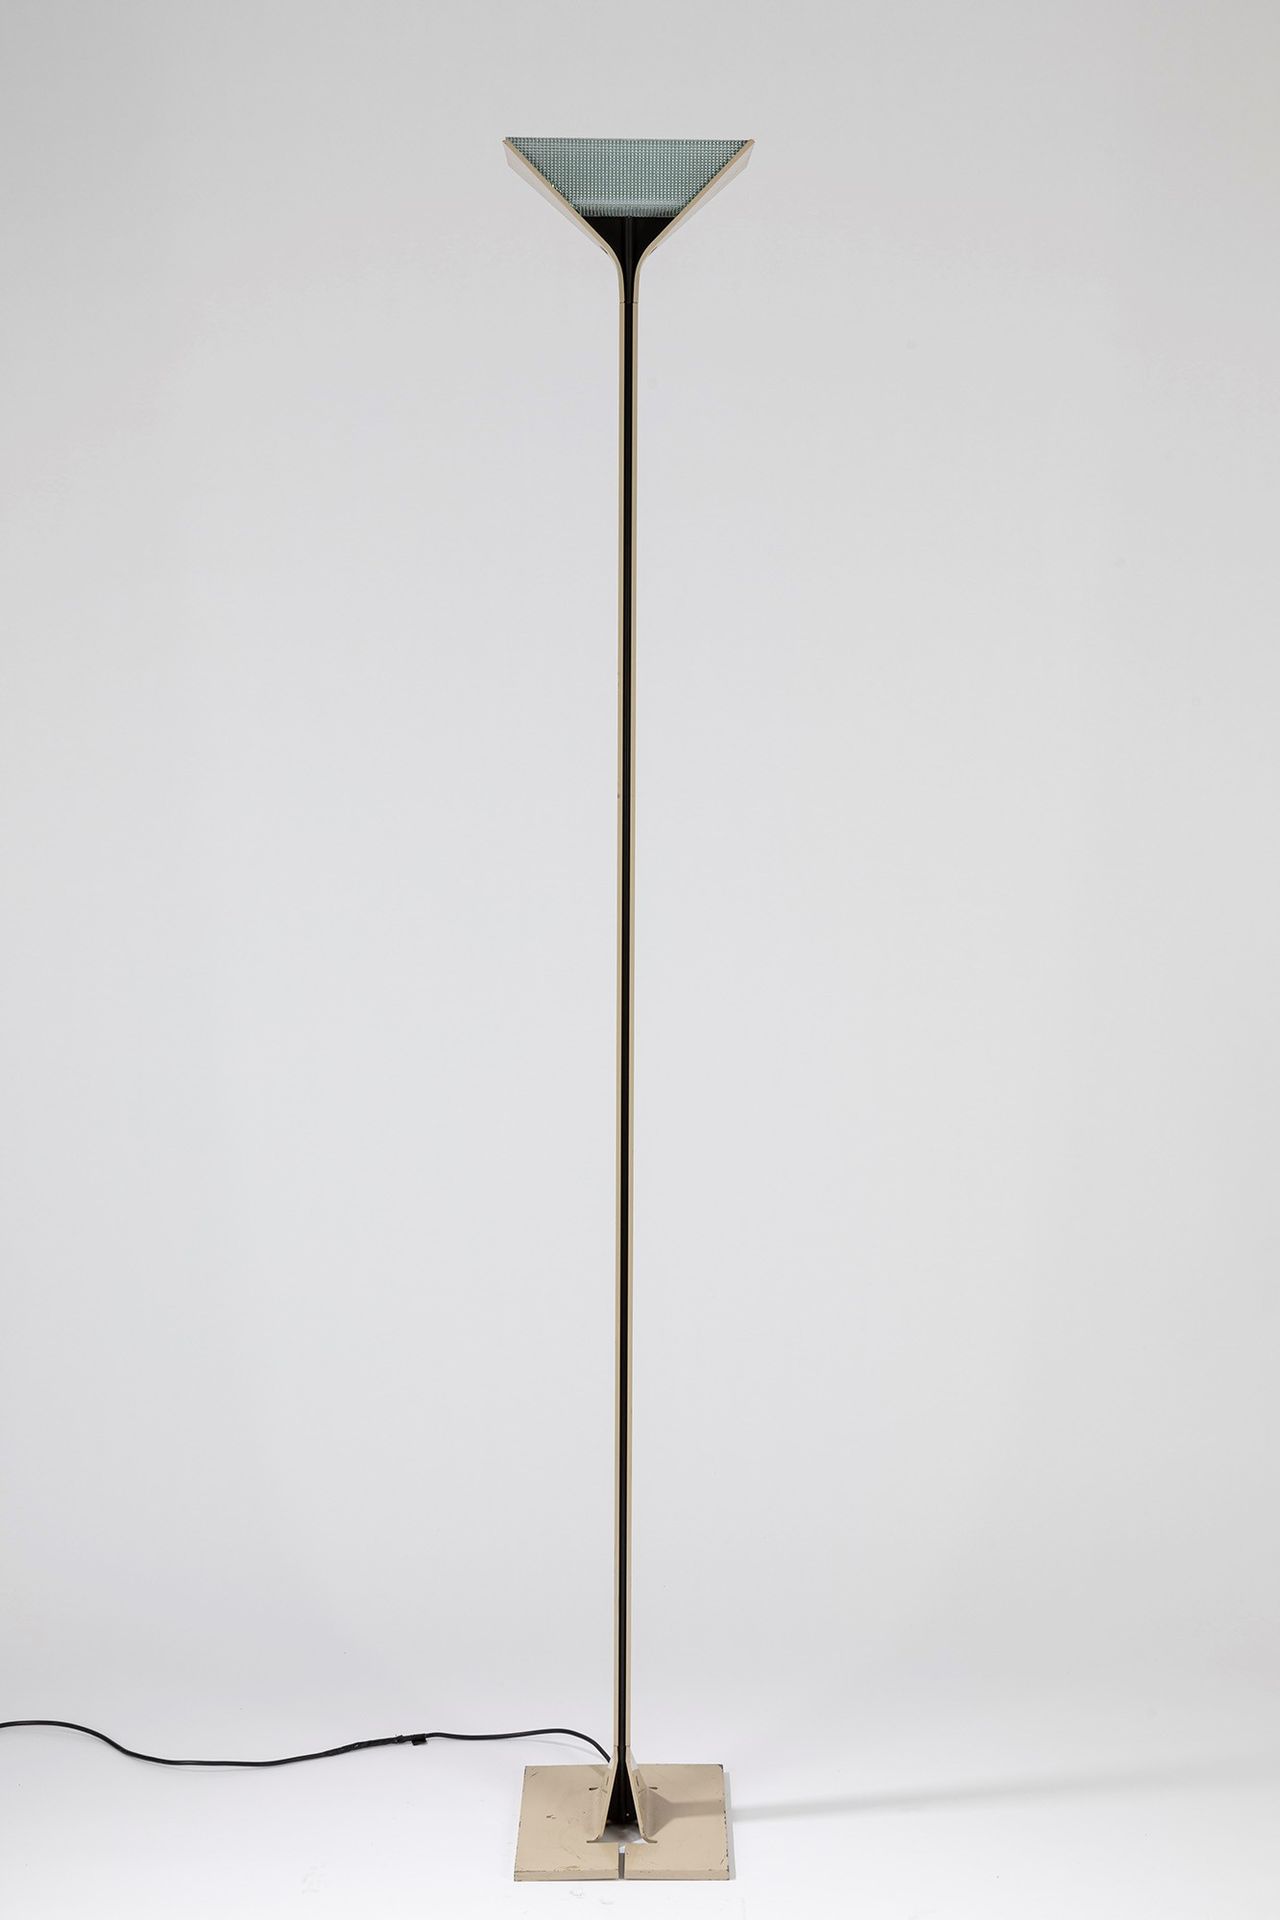 Tobia Scarpa Pair of floor lamps, 70's period

cm h 190 x 25 x 25
Tobia bow tie &hellip;